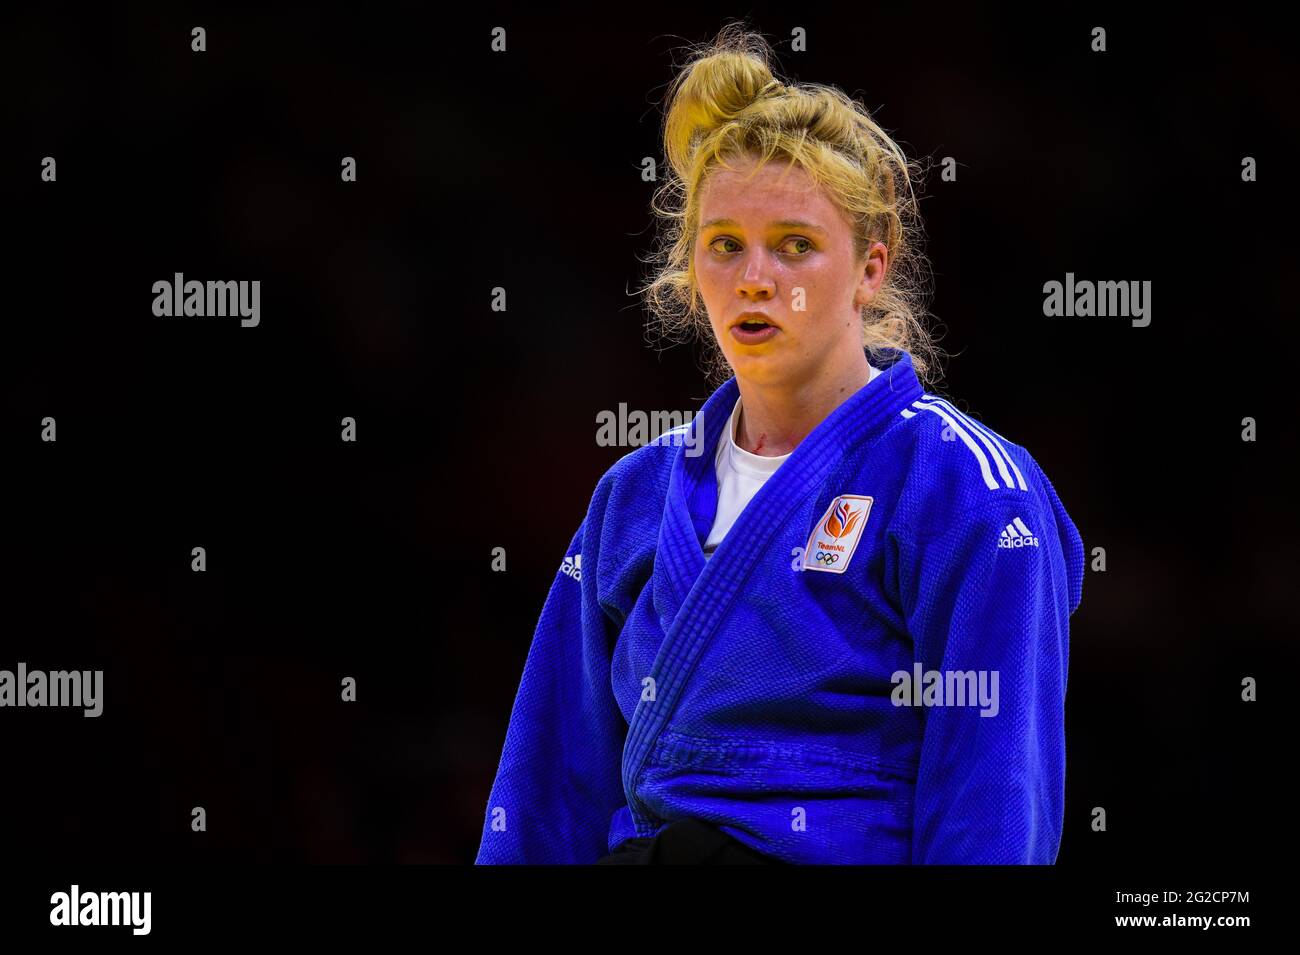 Judo: WK Judo: Boedapest BUDAPEST, HUNGARY - JUNE 10: Hilde Jager of the  Netherlands during the World Judo Championships Hungary 2021 at Papp Laszlo  Budapest Sports Arena on June 10, 2021 in